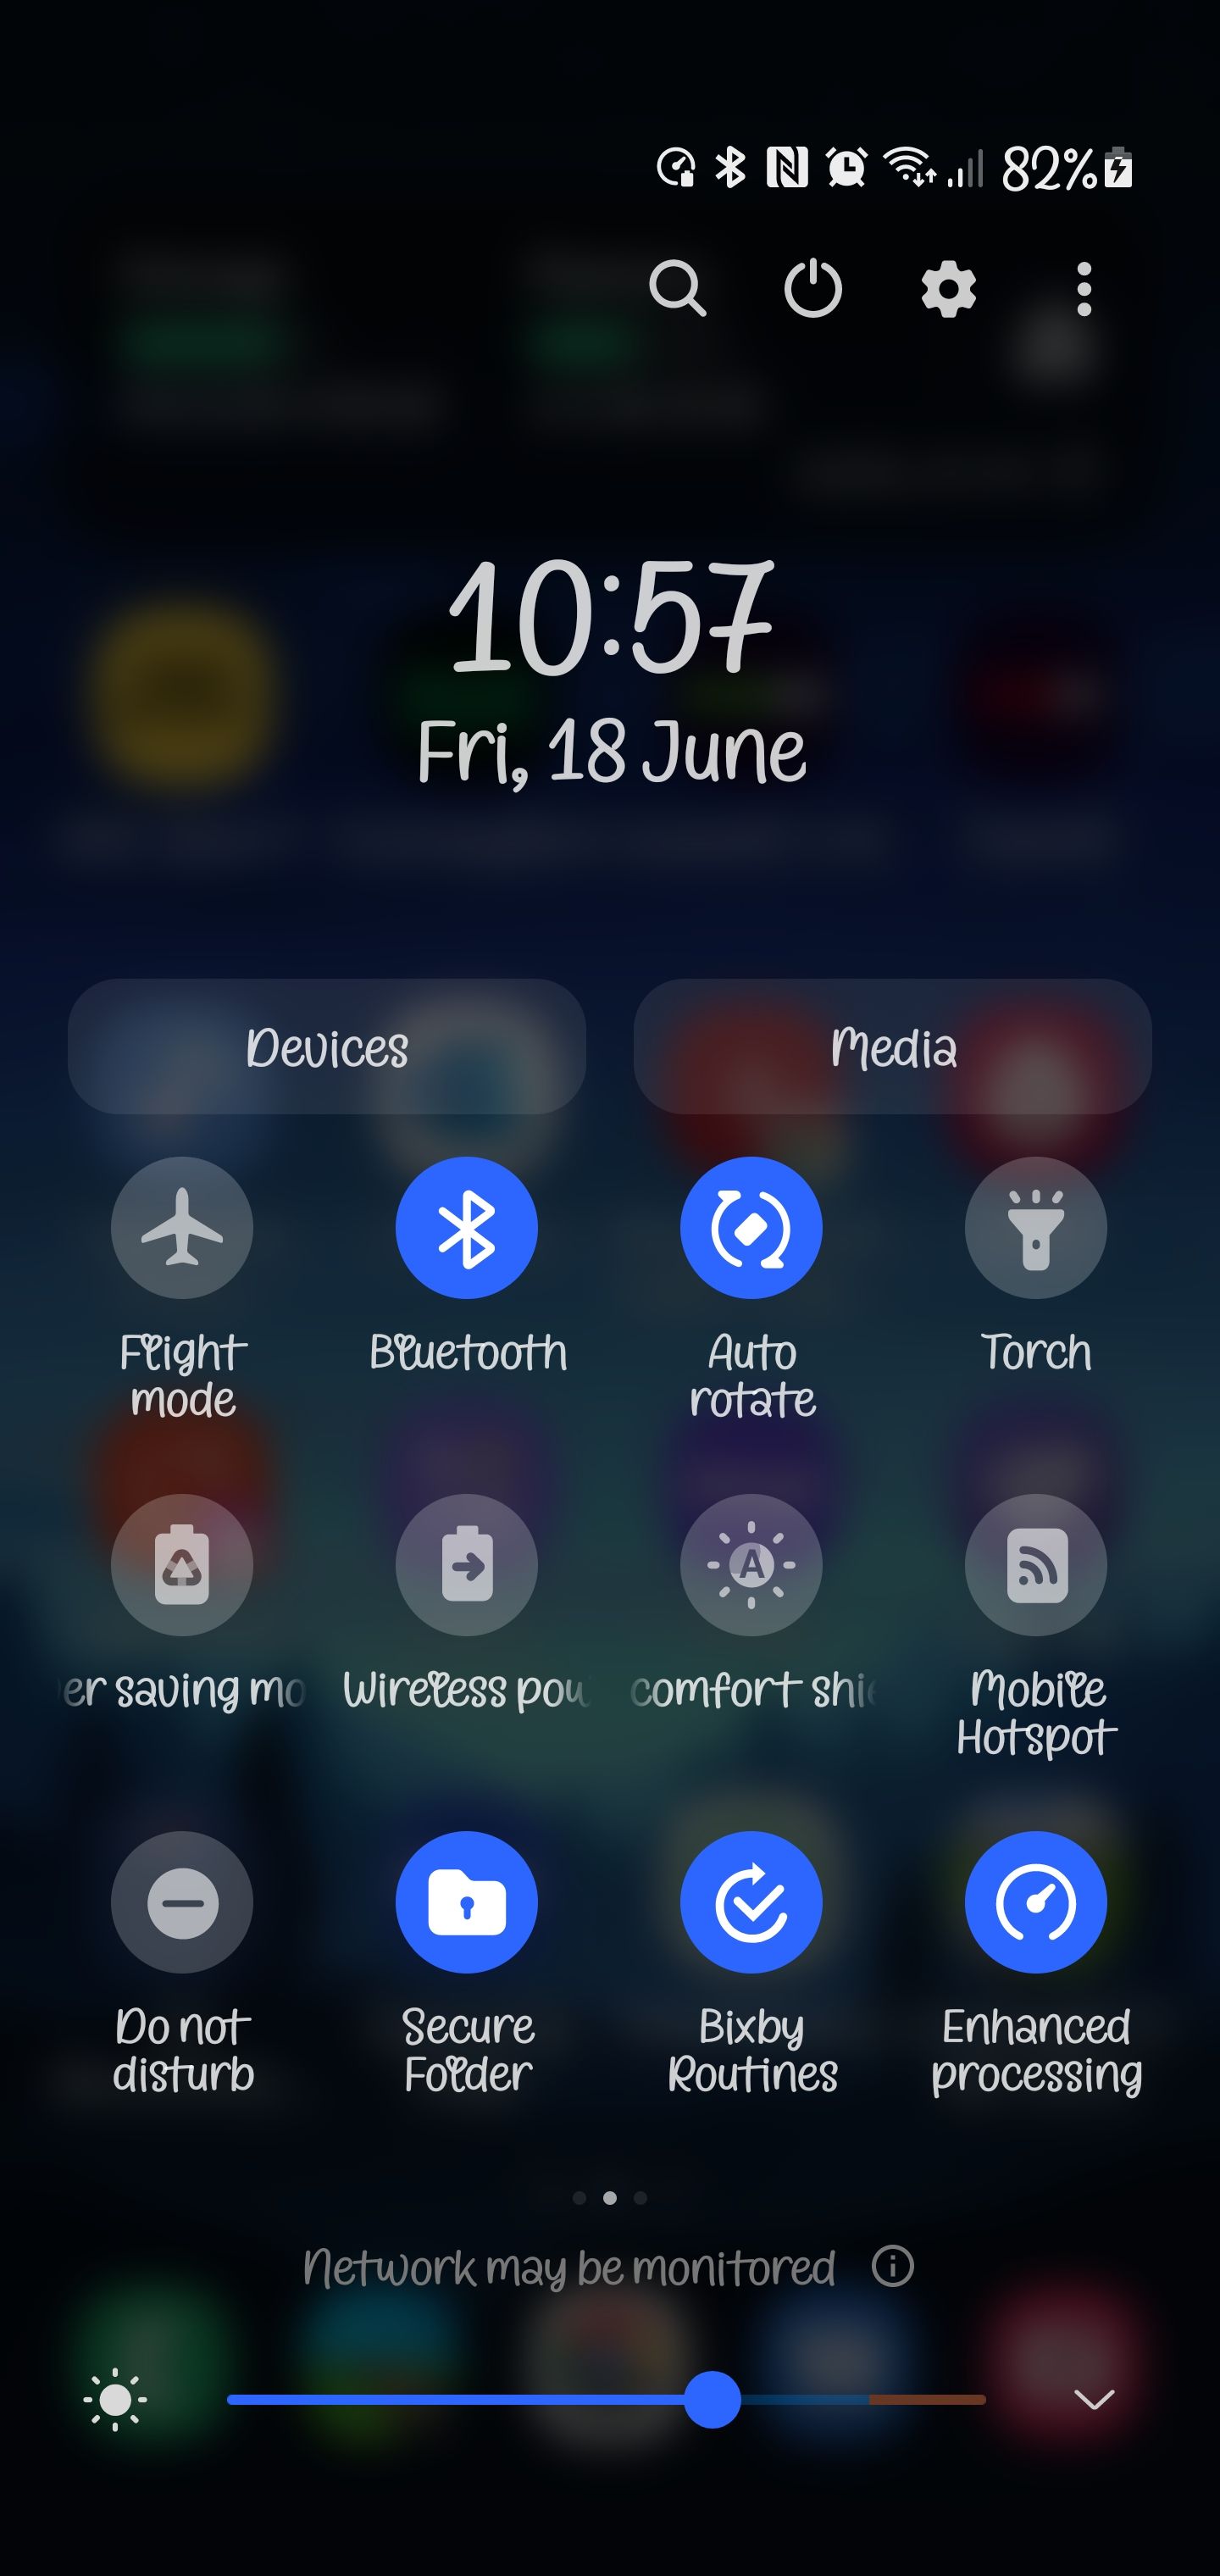 show-hide-from-status-bar-the-bluethoot-nfc-flight-mode-s-icons